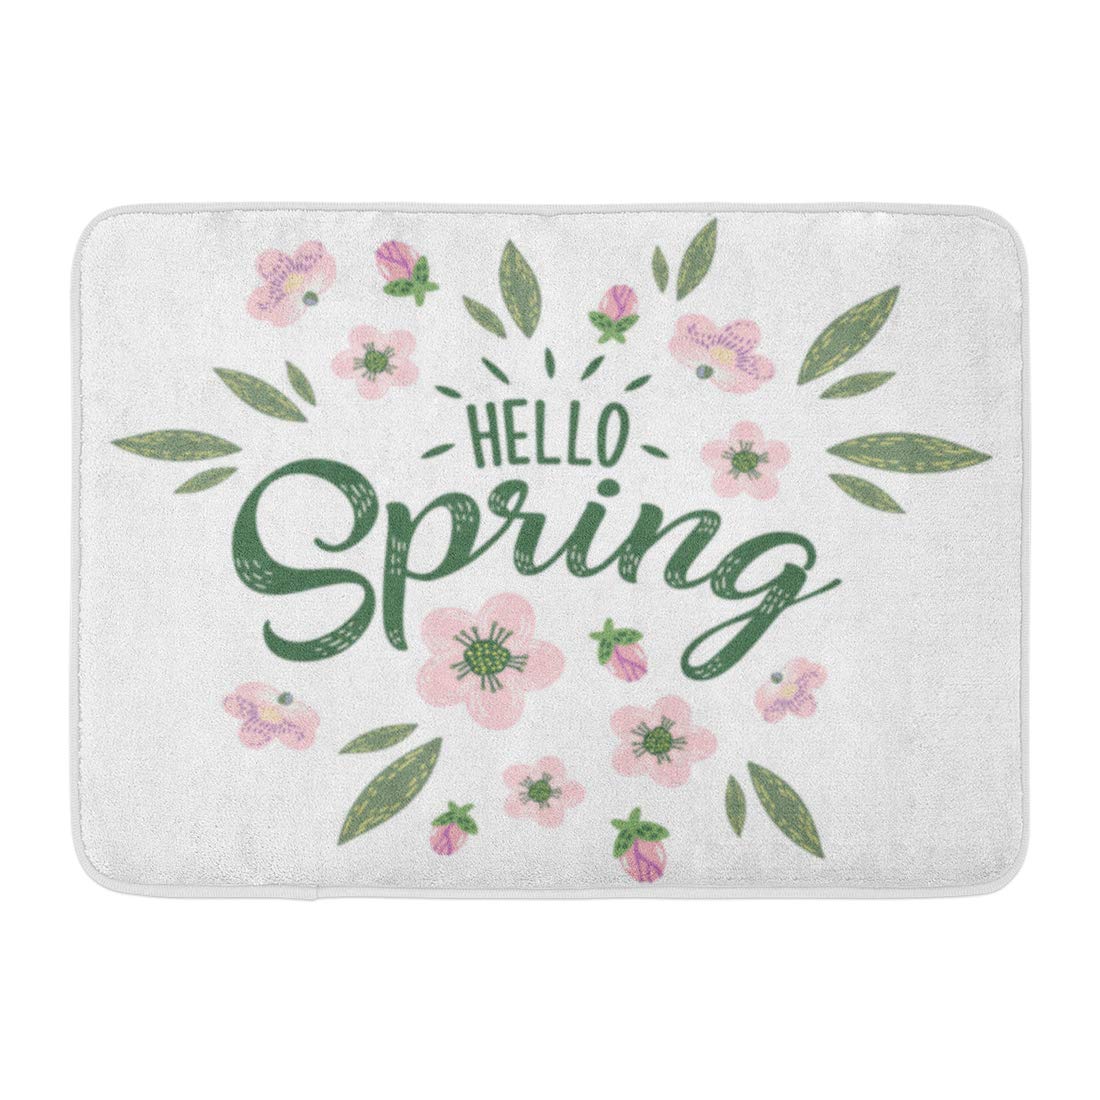 GODPOK Pink Hello Spring Hand Sketched Logotype Badge Lettering Season with Flowers for Retro Vintage Colorful Rug Doormat Bath Mat 23.6x15.7 inch - image 1 of 1